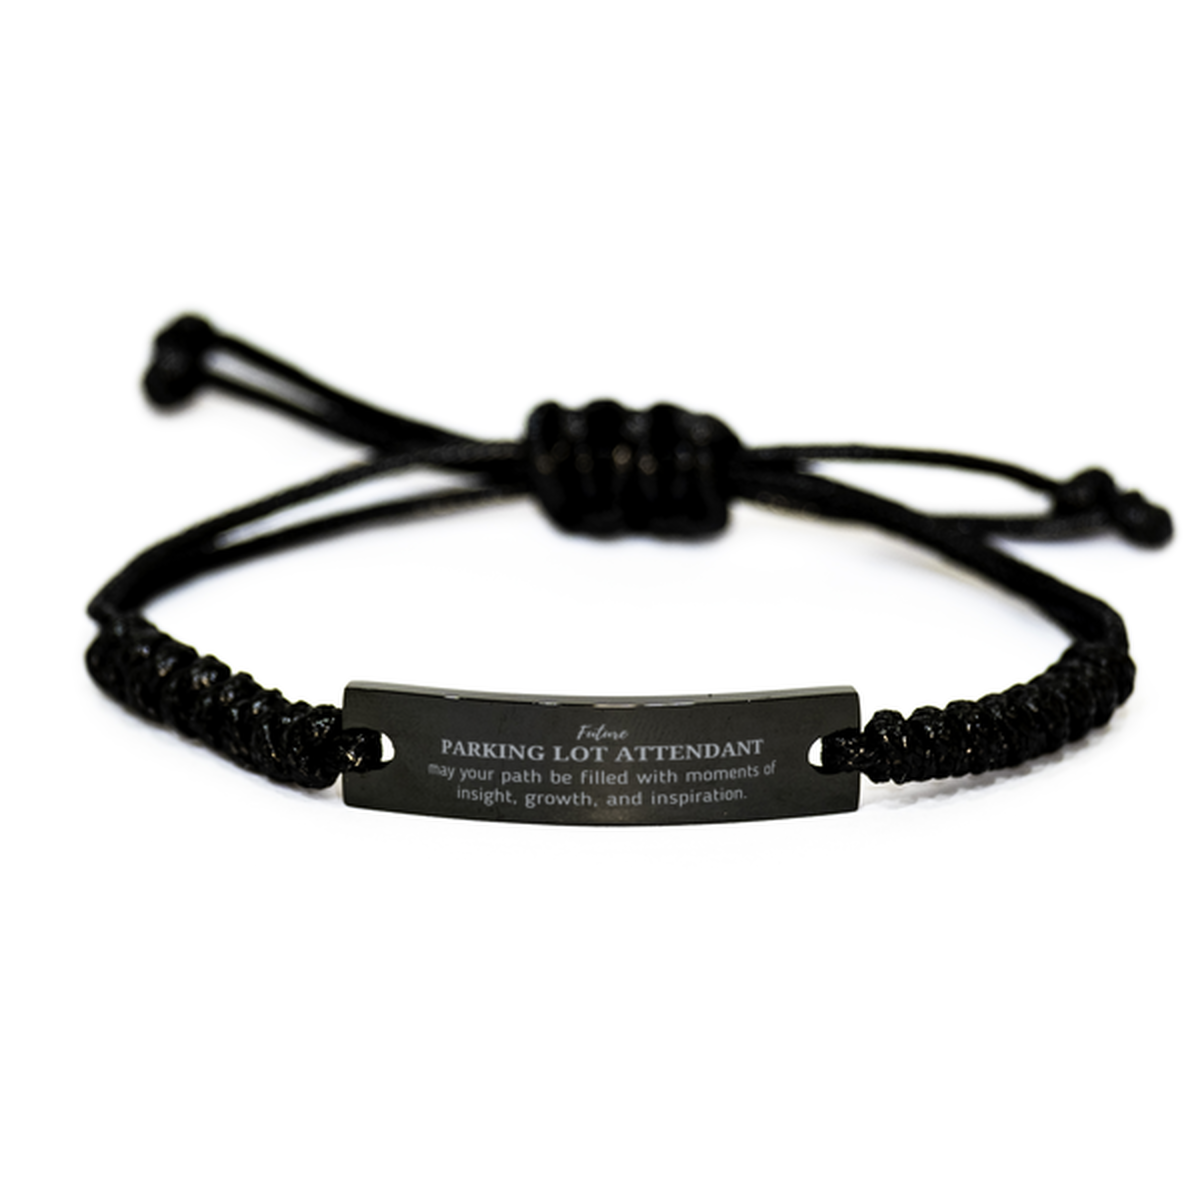 Future Parking Lot Attendant Gifts, May your path be filled with moments of insight, Graduation Gifts for New Parking Lot Attendant, Christmas Unique Black Rope Bracelet For Men, Women, Friends